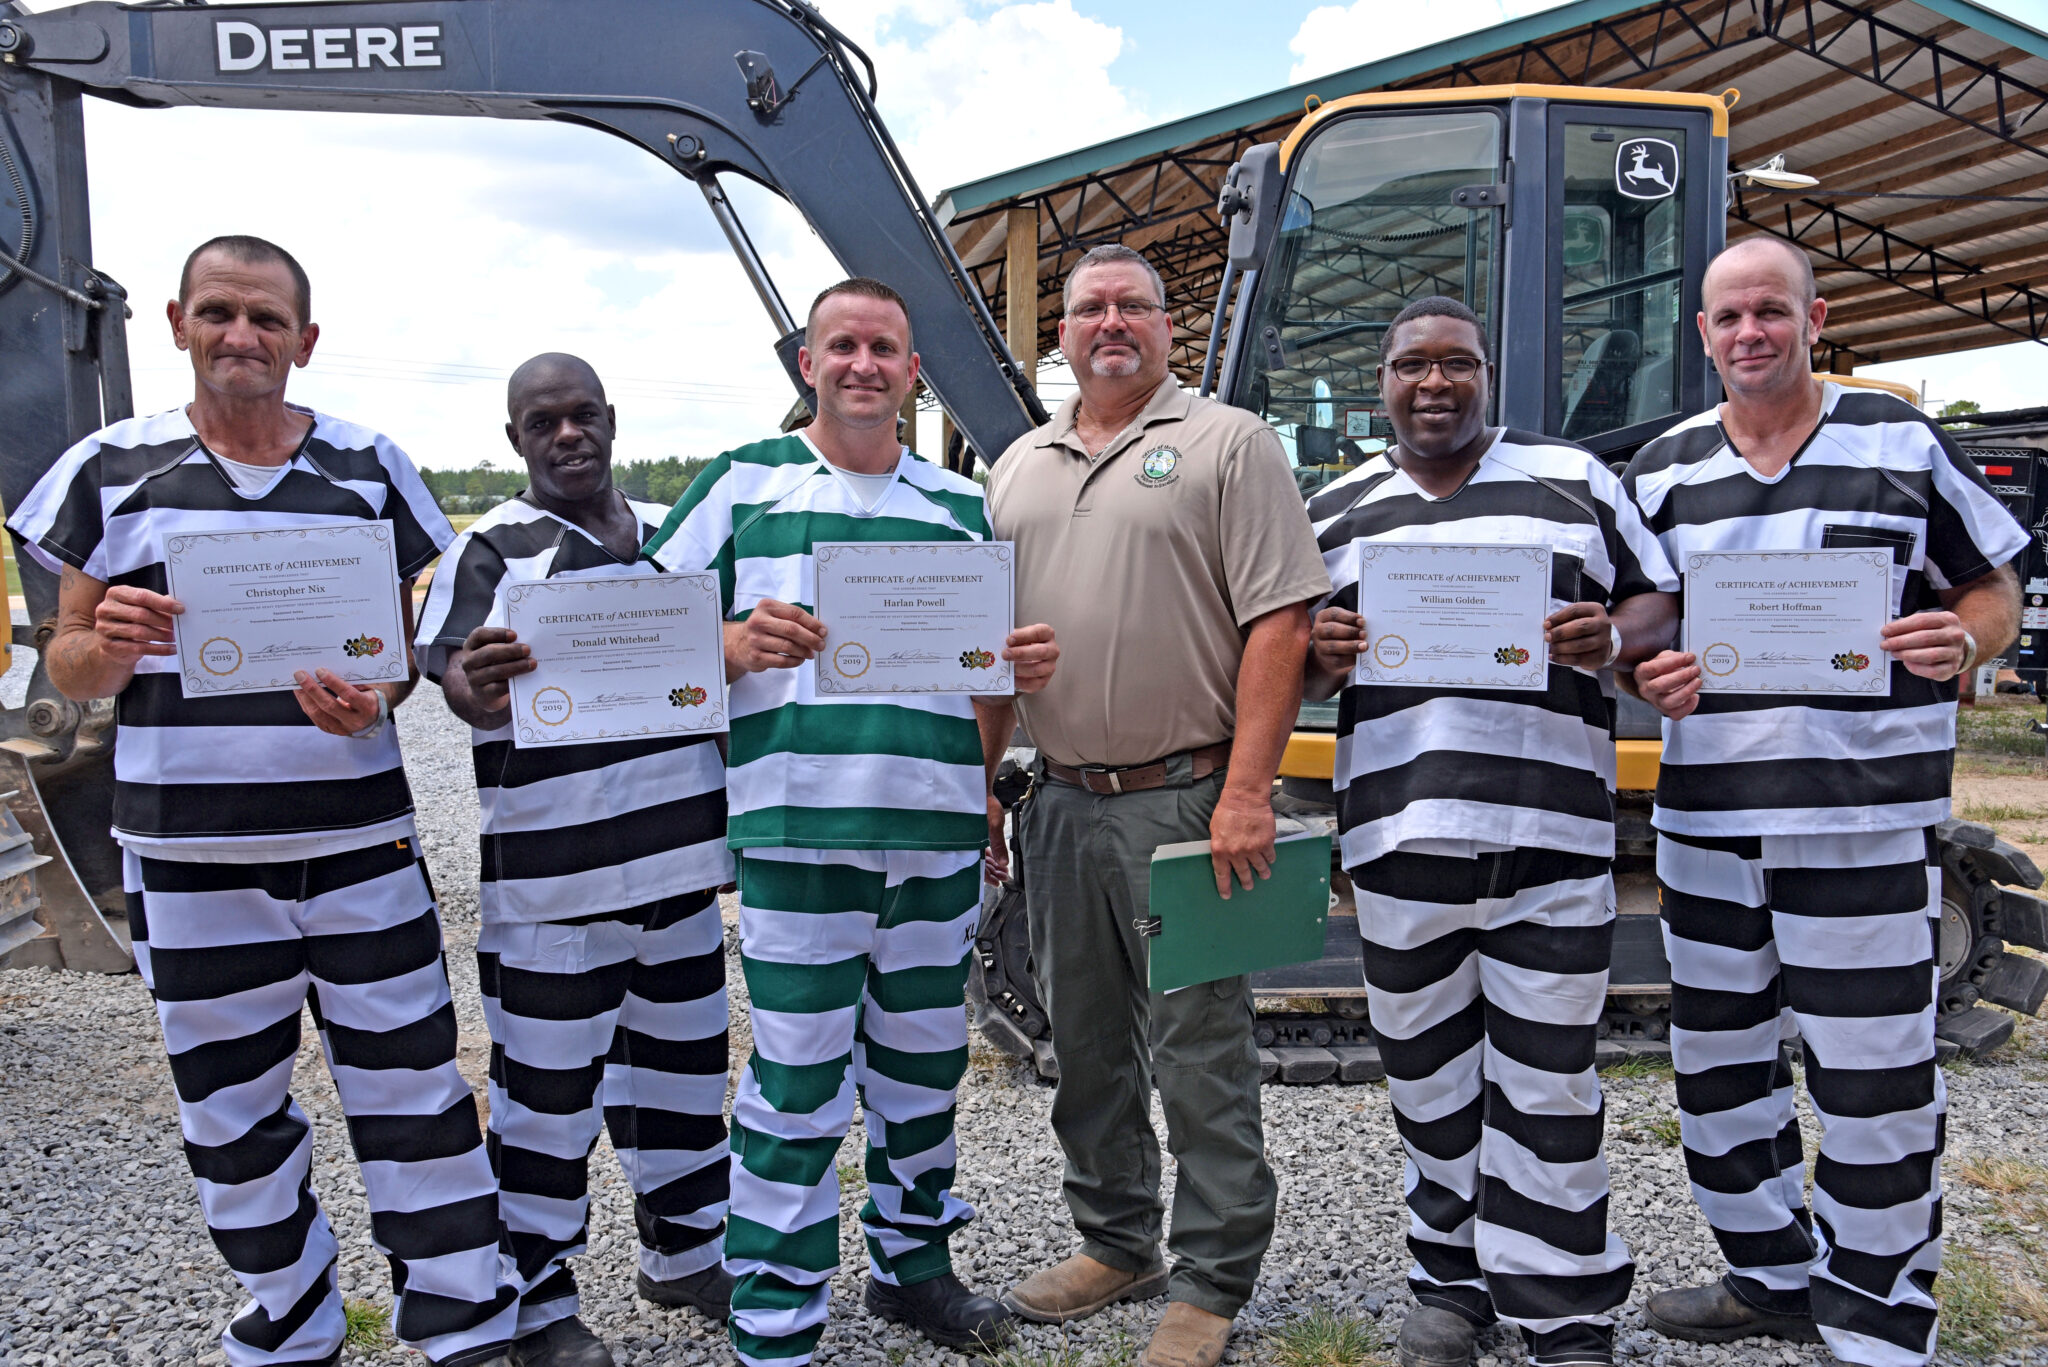 SECOND CLASS OF INMATES GRADUATE FROM HEAVY EQUIPMENT PROGRAM AT WALTON